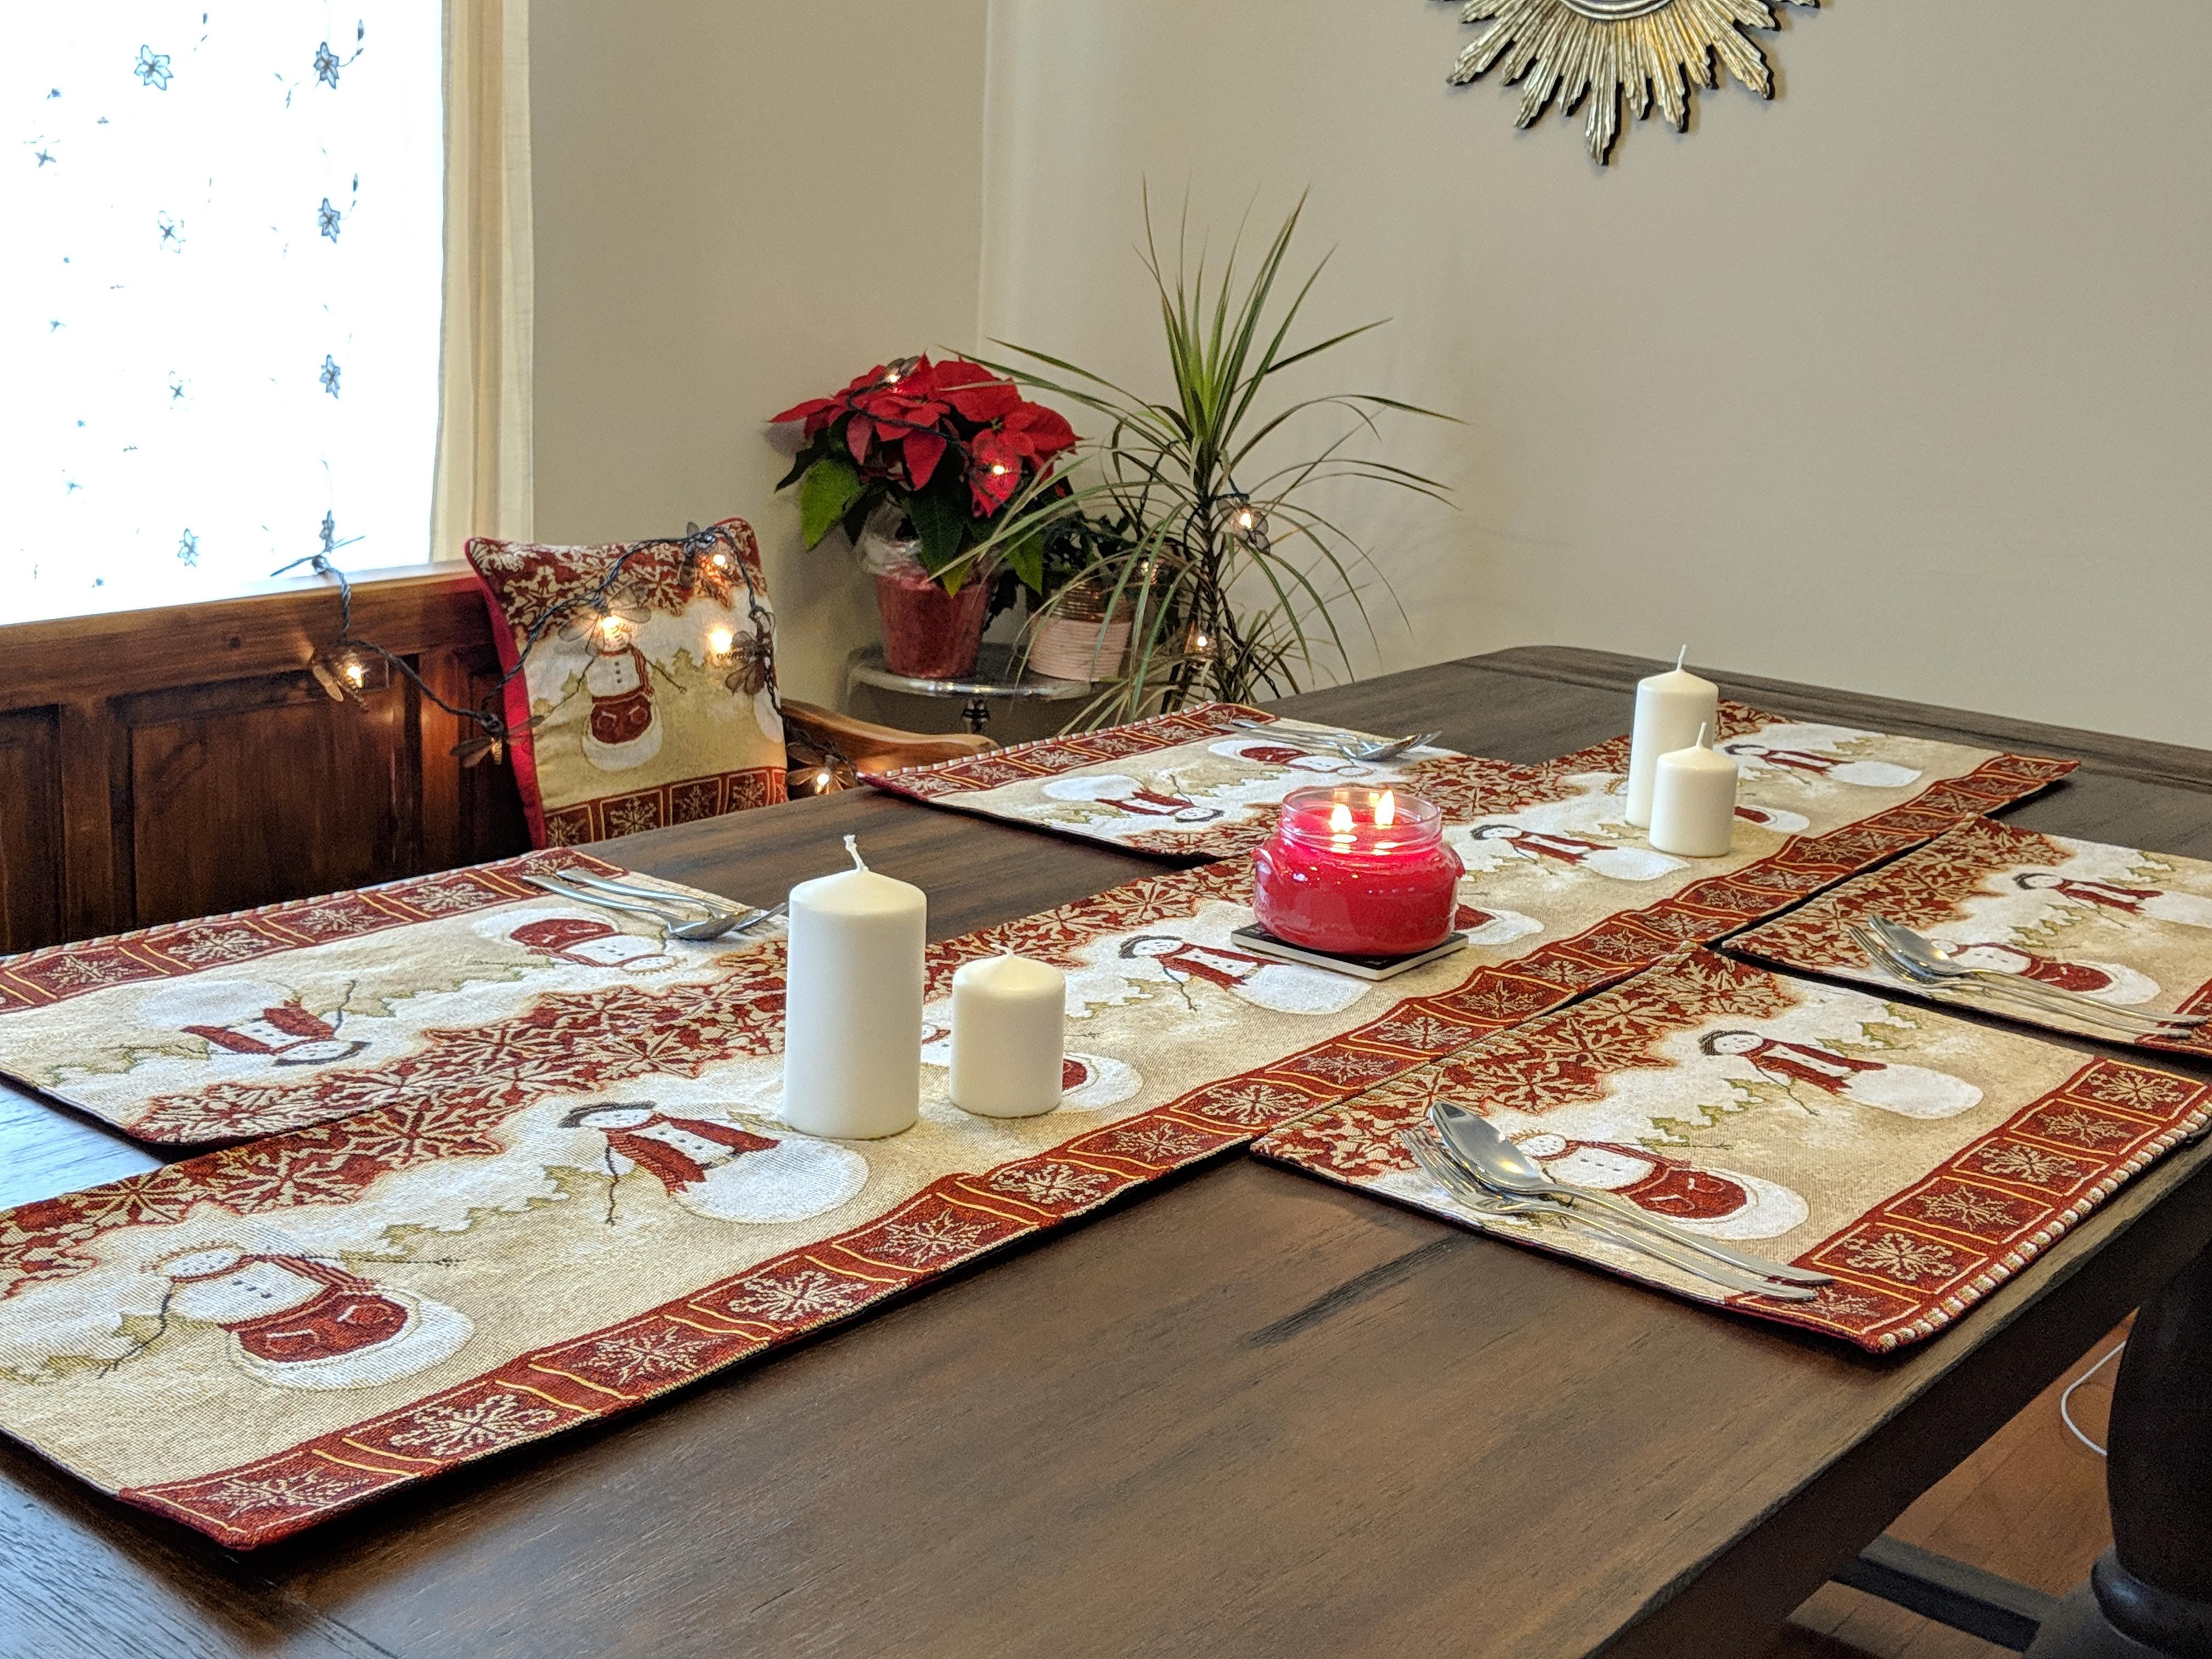 Tache Mr. & Mrs. Snowman Couple Woven Tapestry Table Runners (10323TR) - Tache Home Fashion